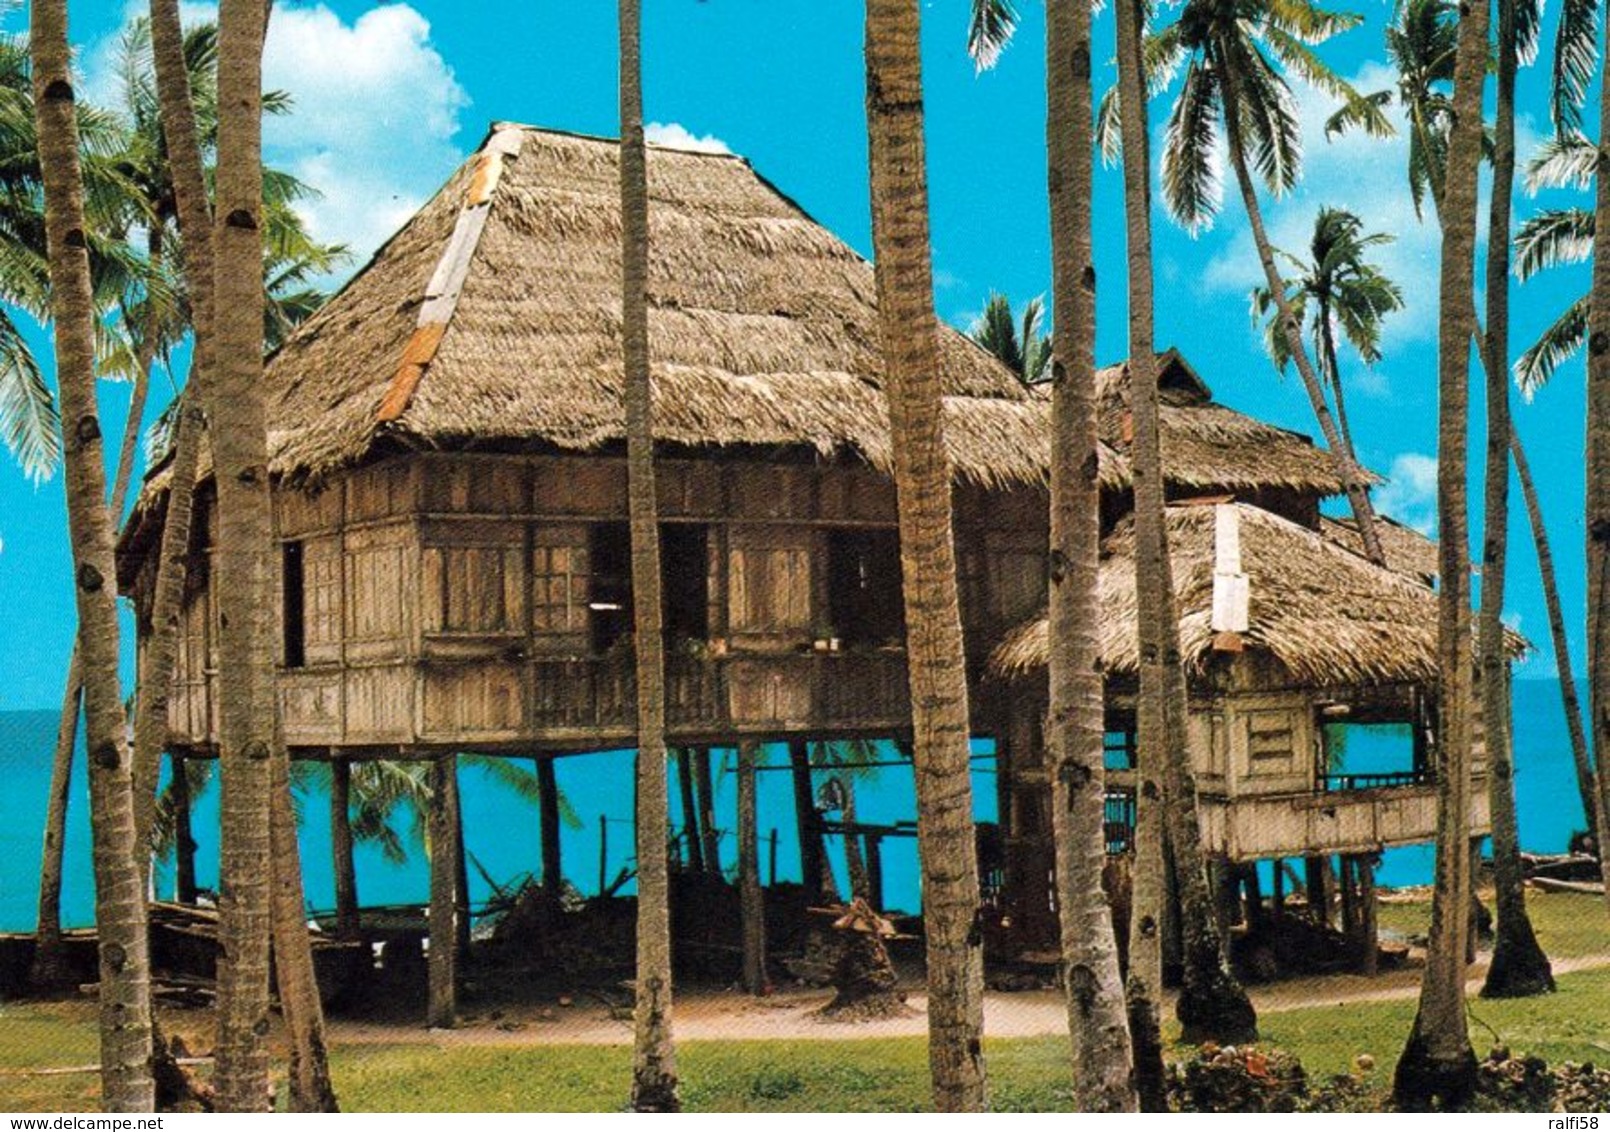 1 AK Philippinen * Traditional House Built From Coconut, Bamboo And Nipa Palm * - Philippinen